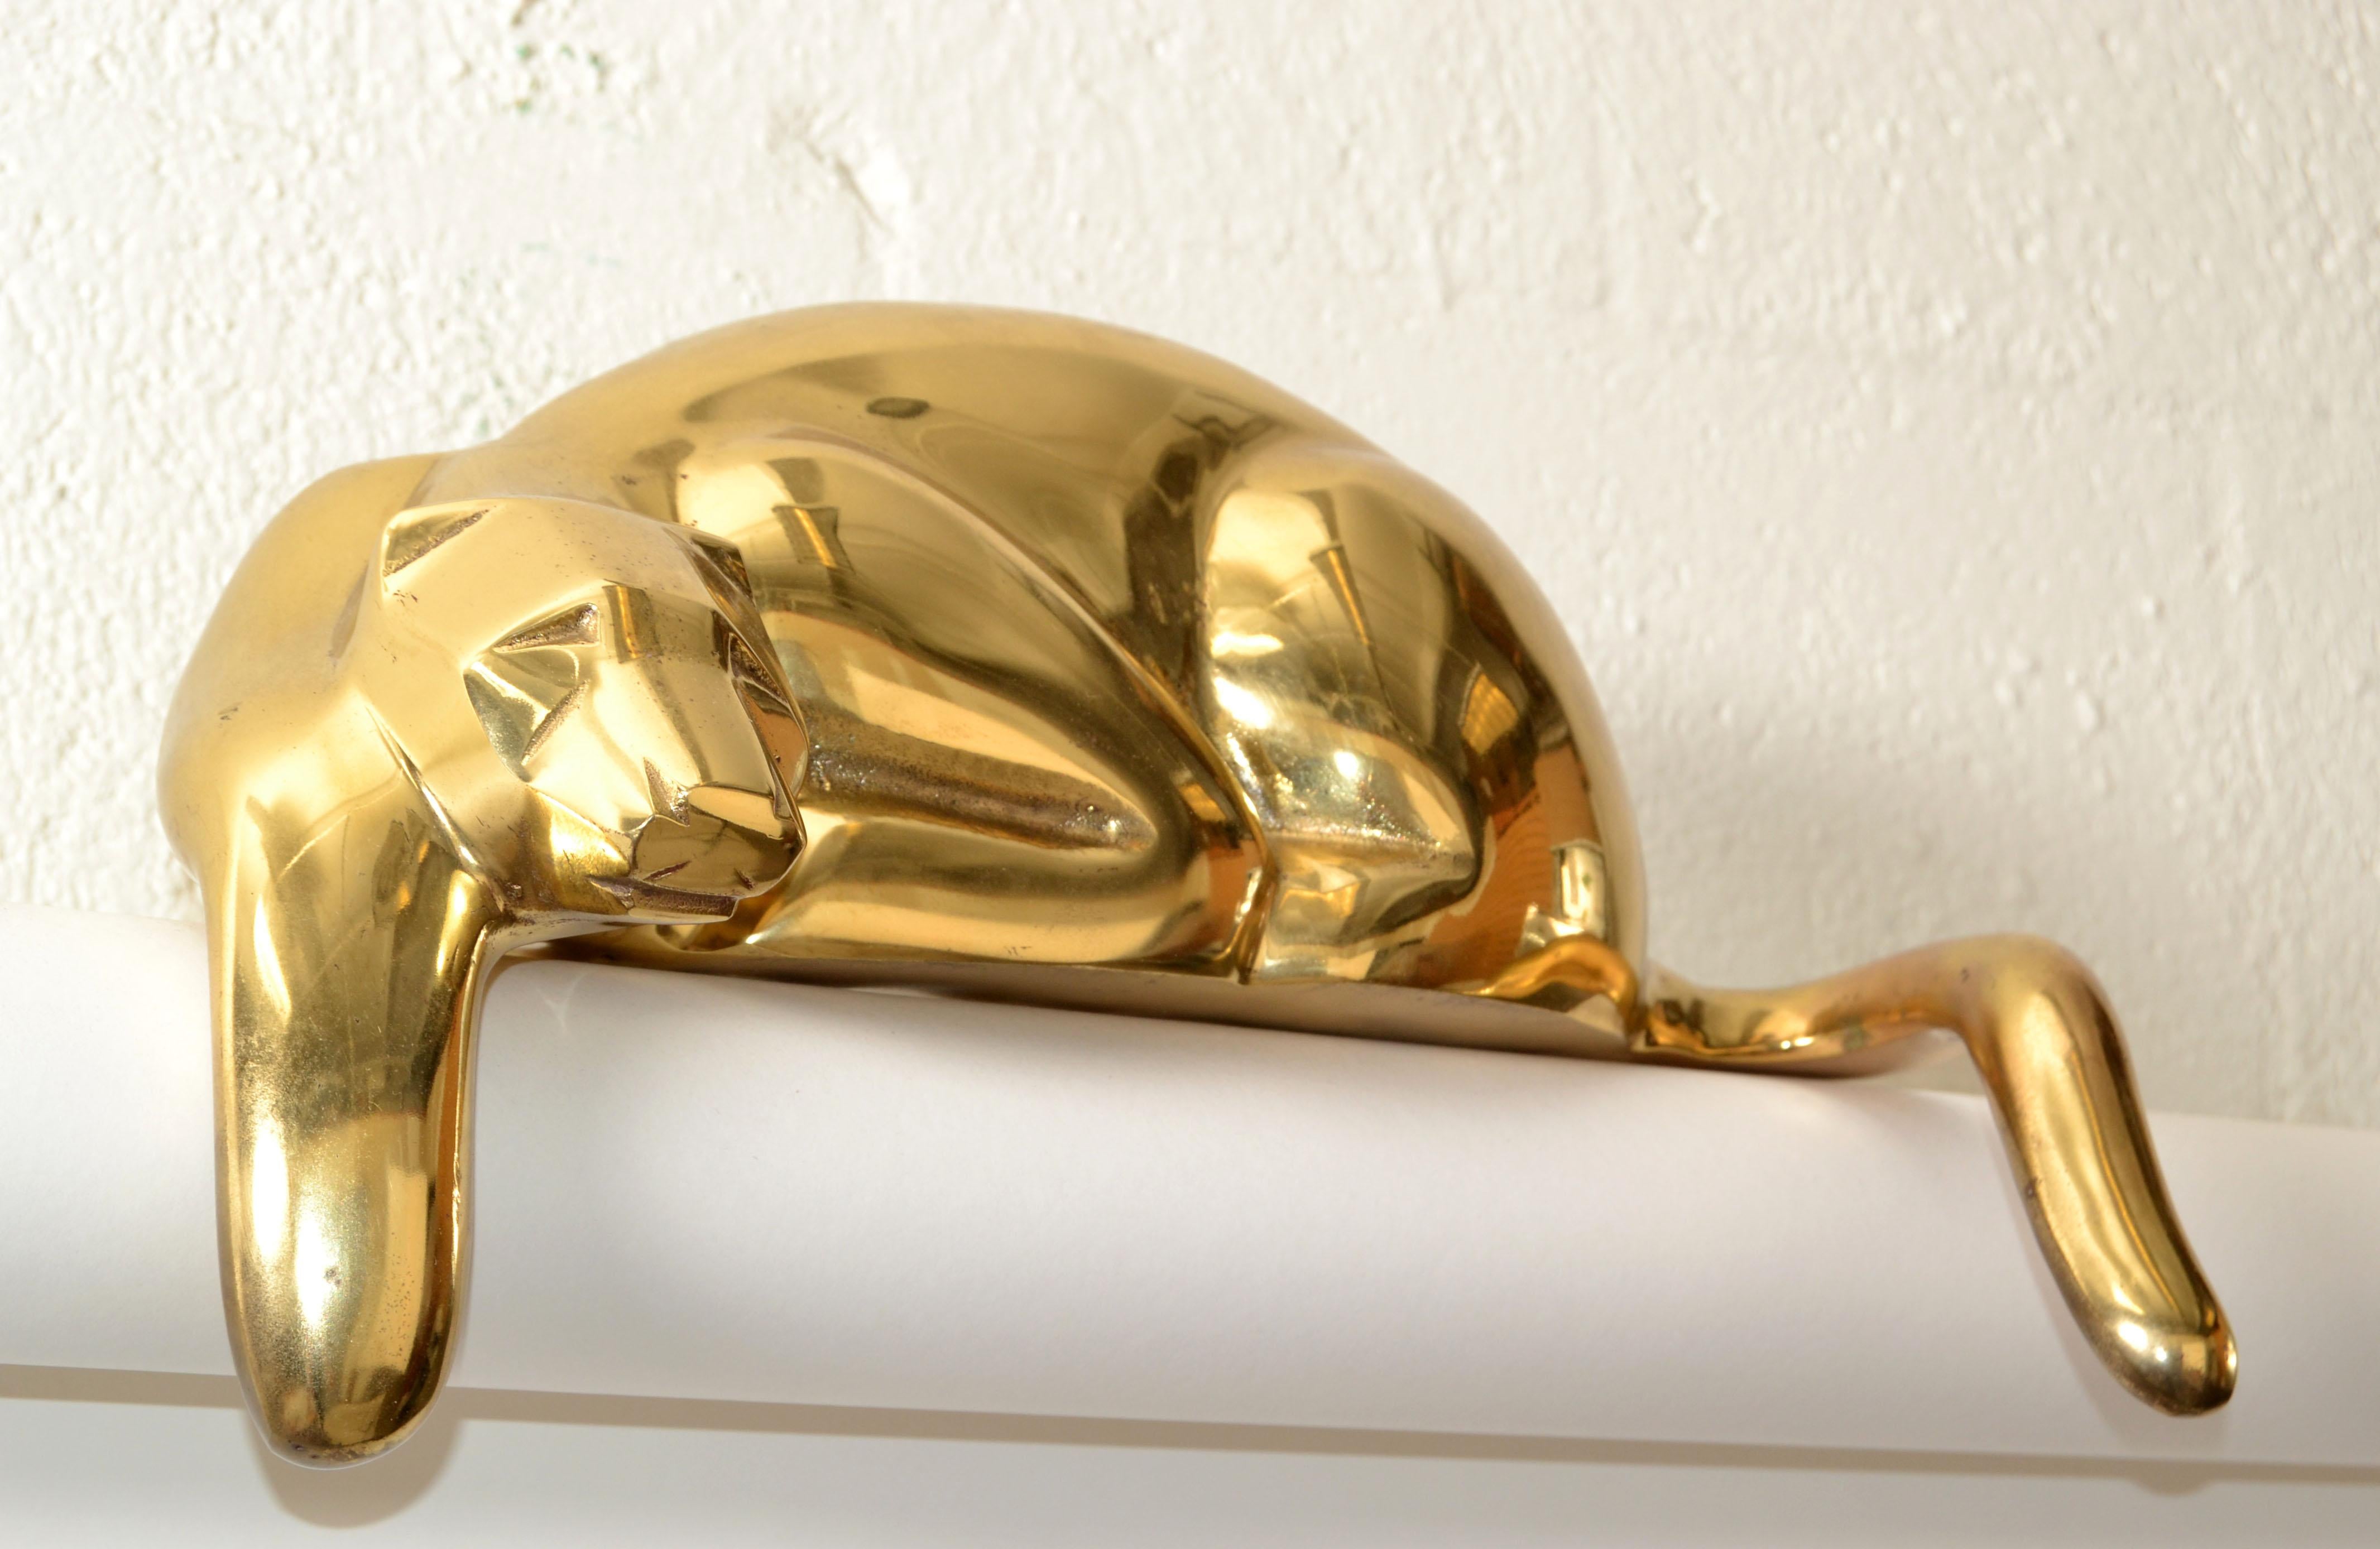 This is a beautiful panther sculpture made out of brass and it is made to hang over a shelf.
Hollywood Regency Style, wonderfully crafted with great curves and lines.